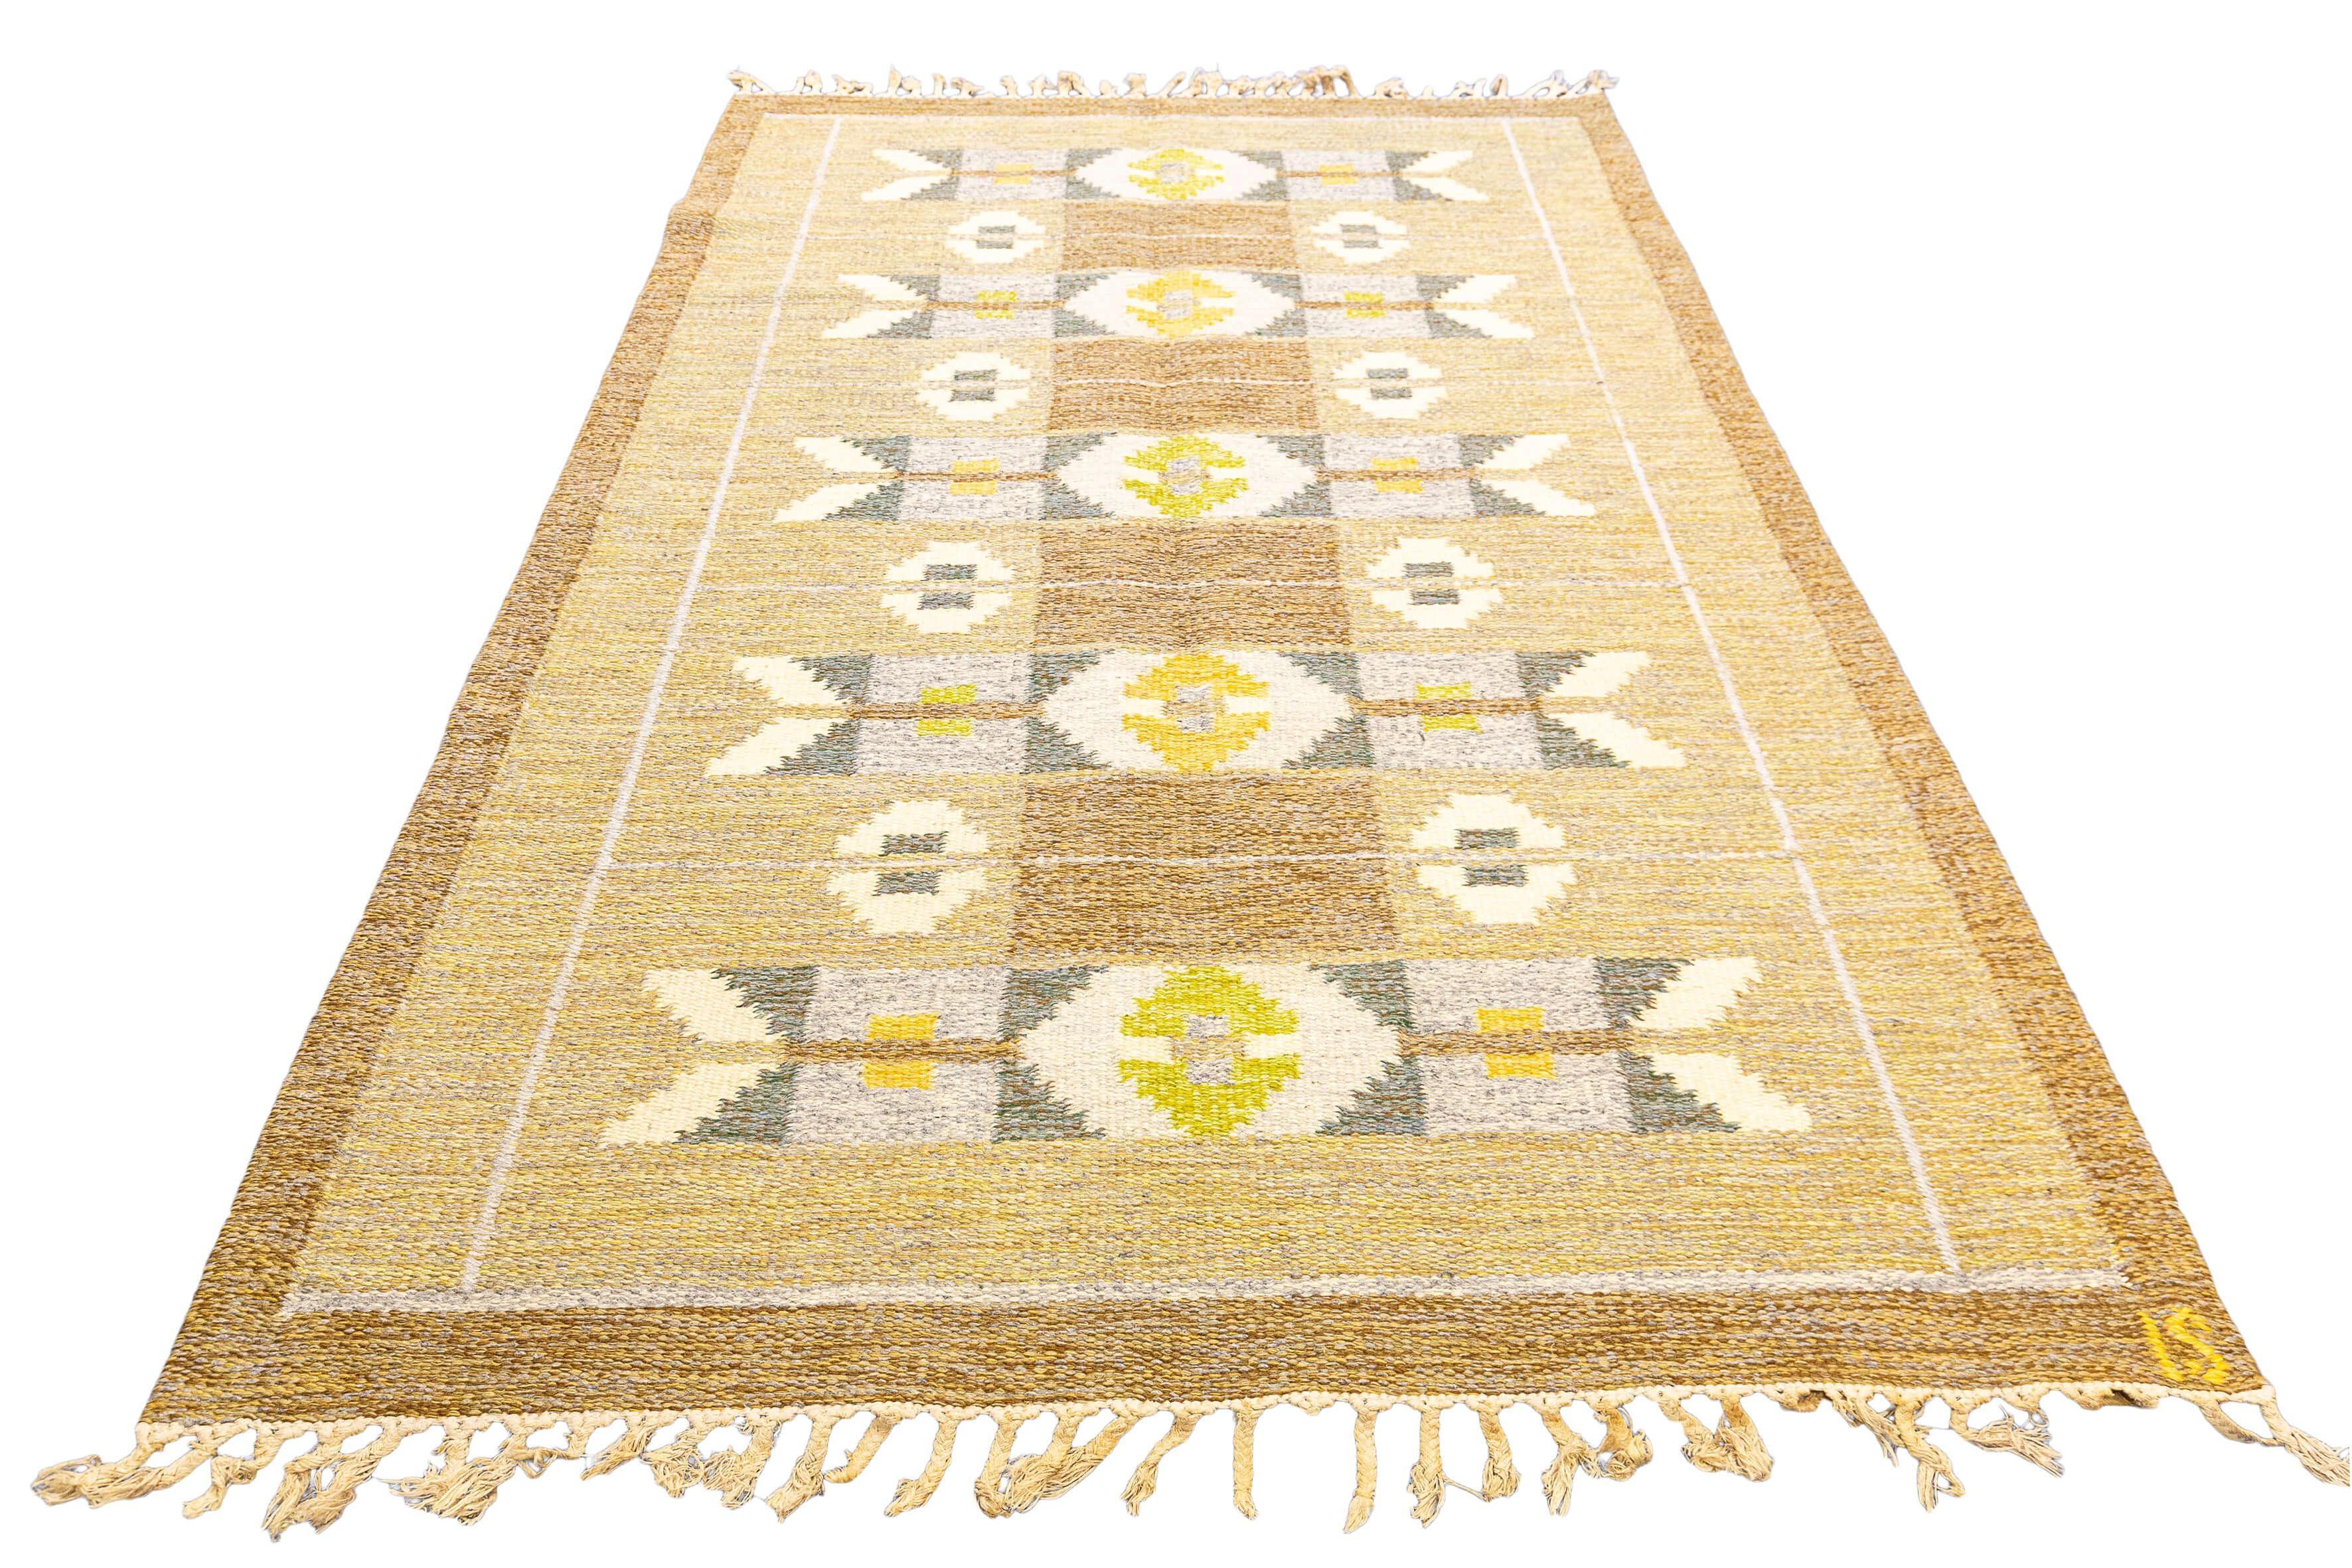 Immerse yourself in the allure of Swedish Rug Rollakan Earthy Tones with this exquisite mid-20th century rug, a true treasure that encapsulates the artistry and craftsmanship of a bygone era. Measuring 200 x 133 CM, this captivating piece carries